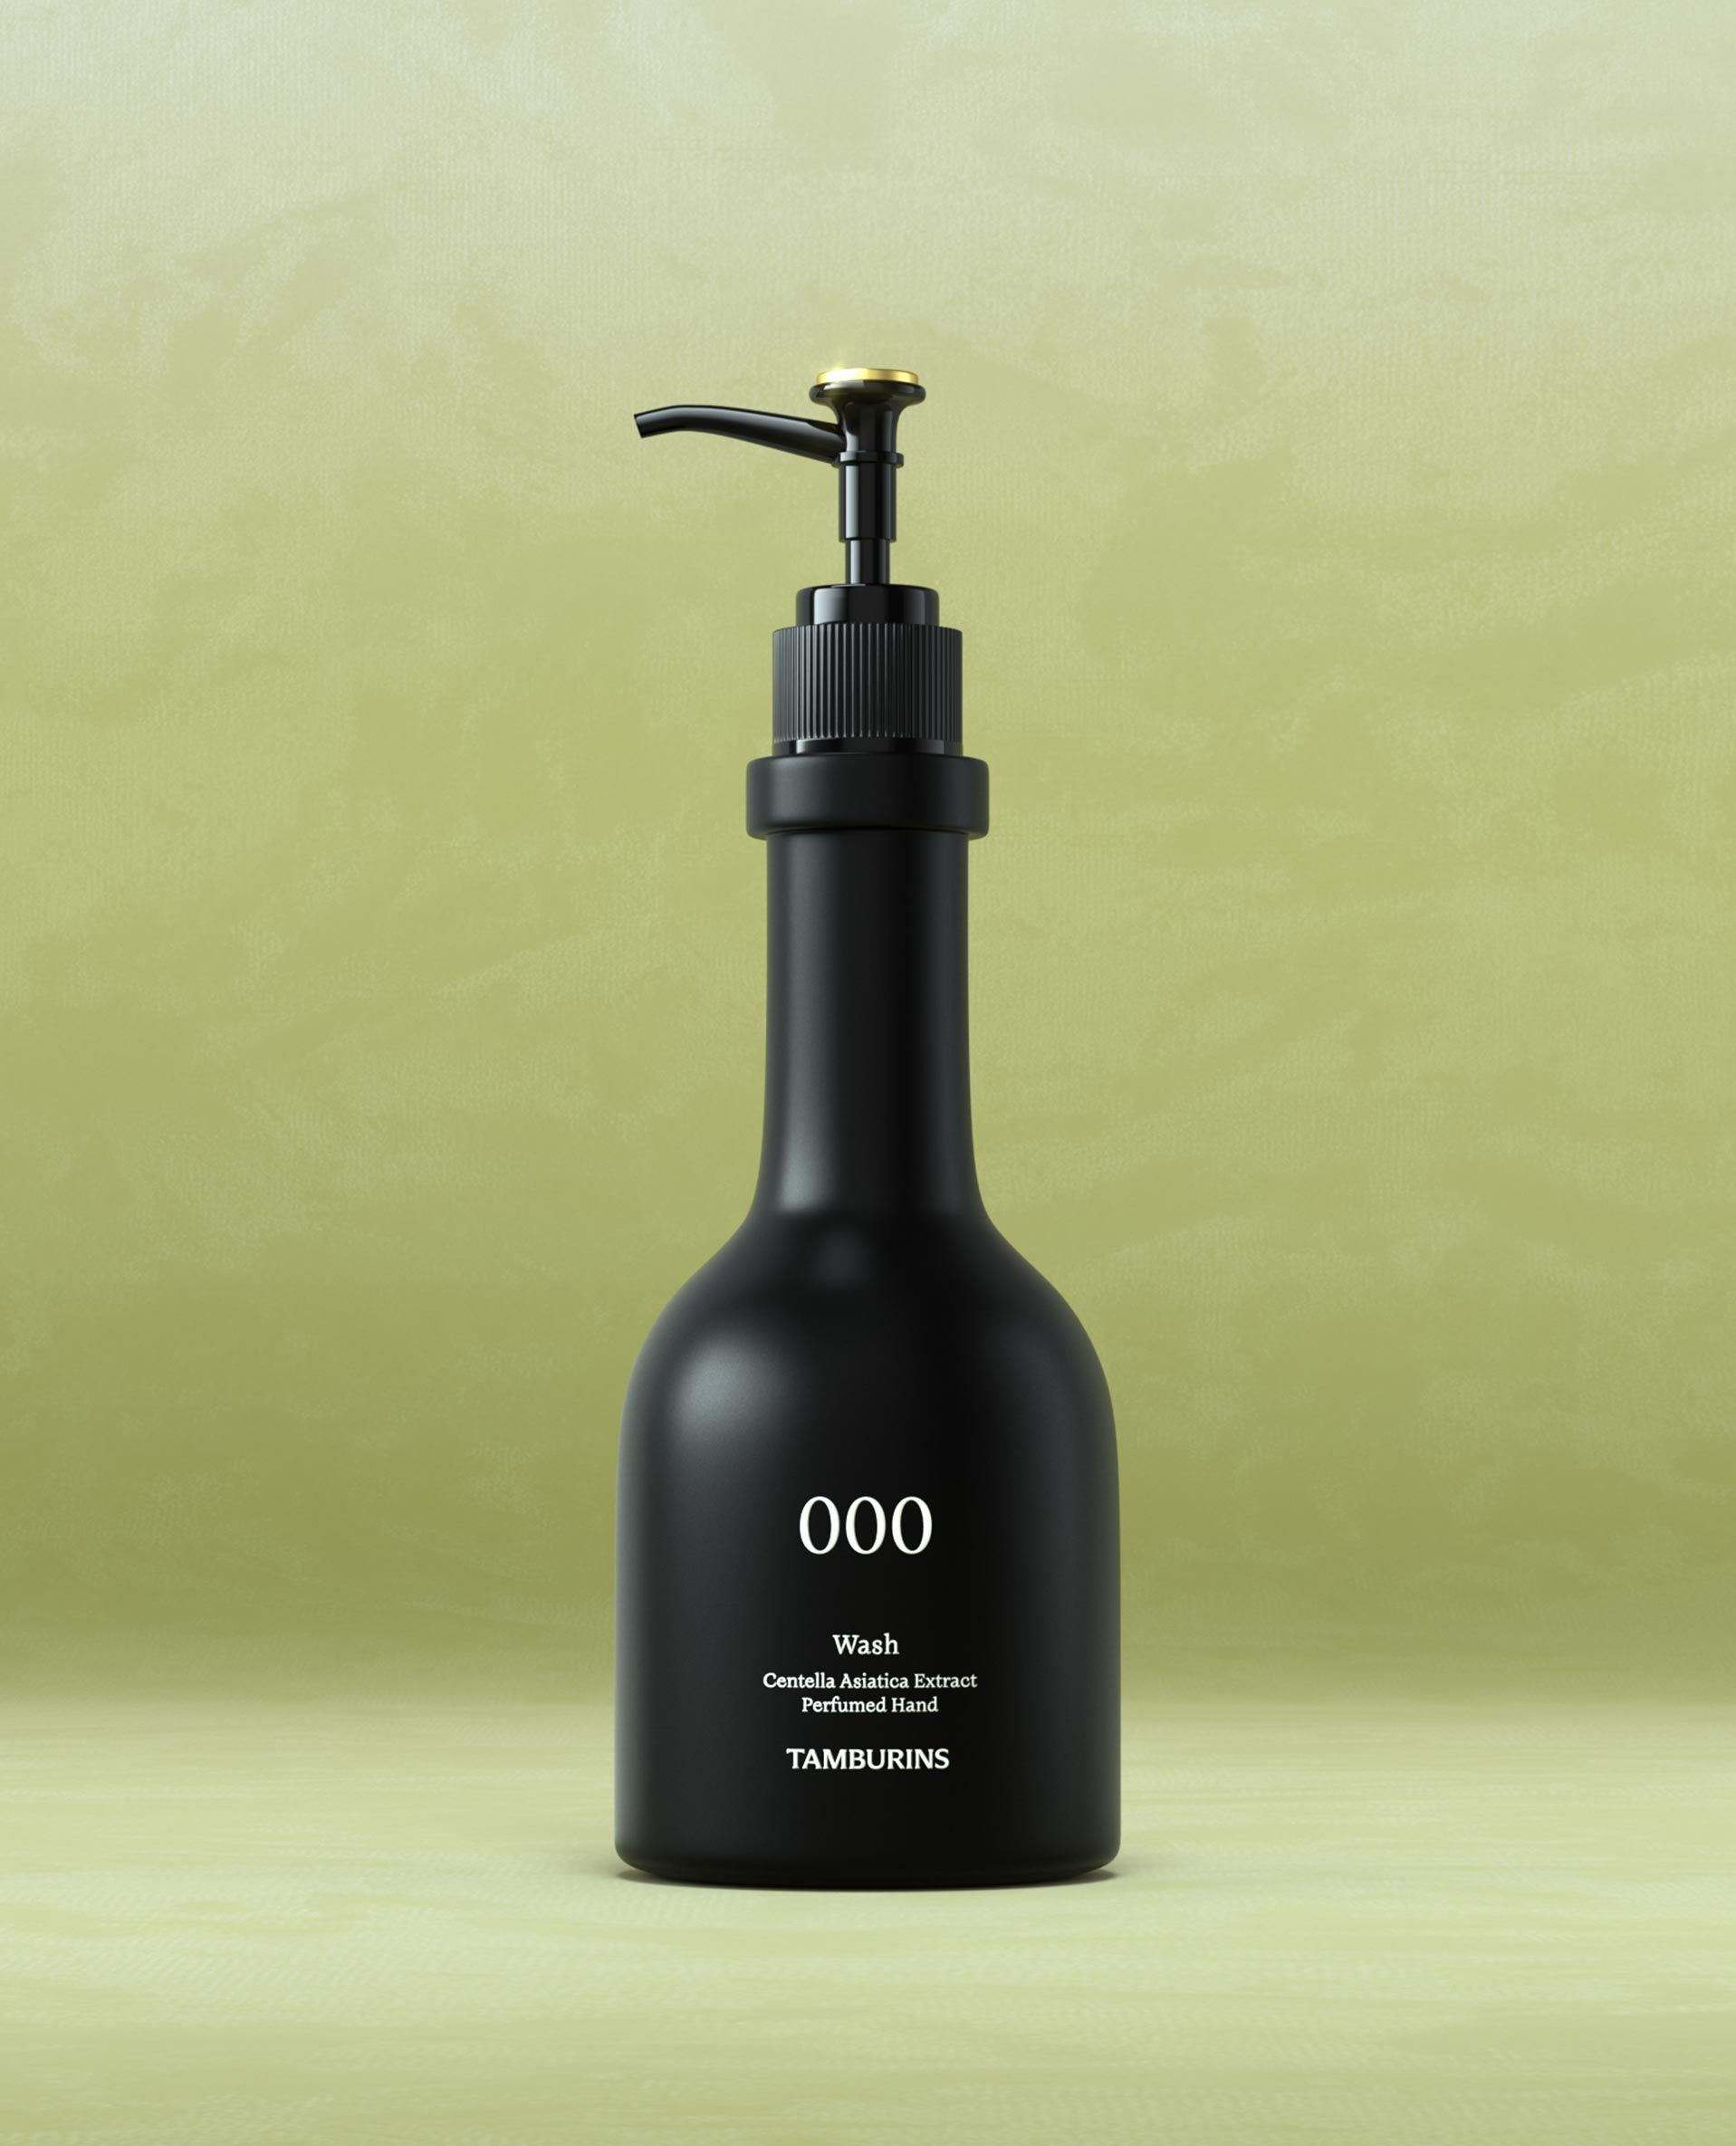 A sleek black pump bottle with a matte finish, labeled with the brand name "TAMBURINS" and the number "000" in white text. The bottom of the label lists the scents: bergamot, sandalwood, and patchouli. The bottle has a gold accent on the pump.